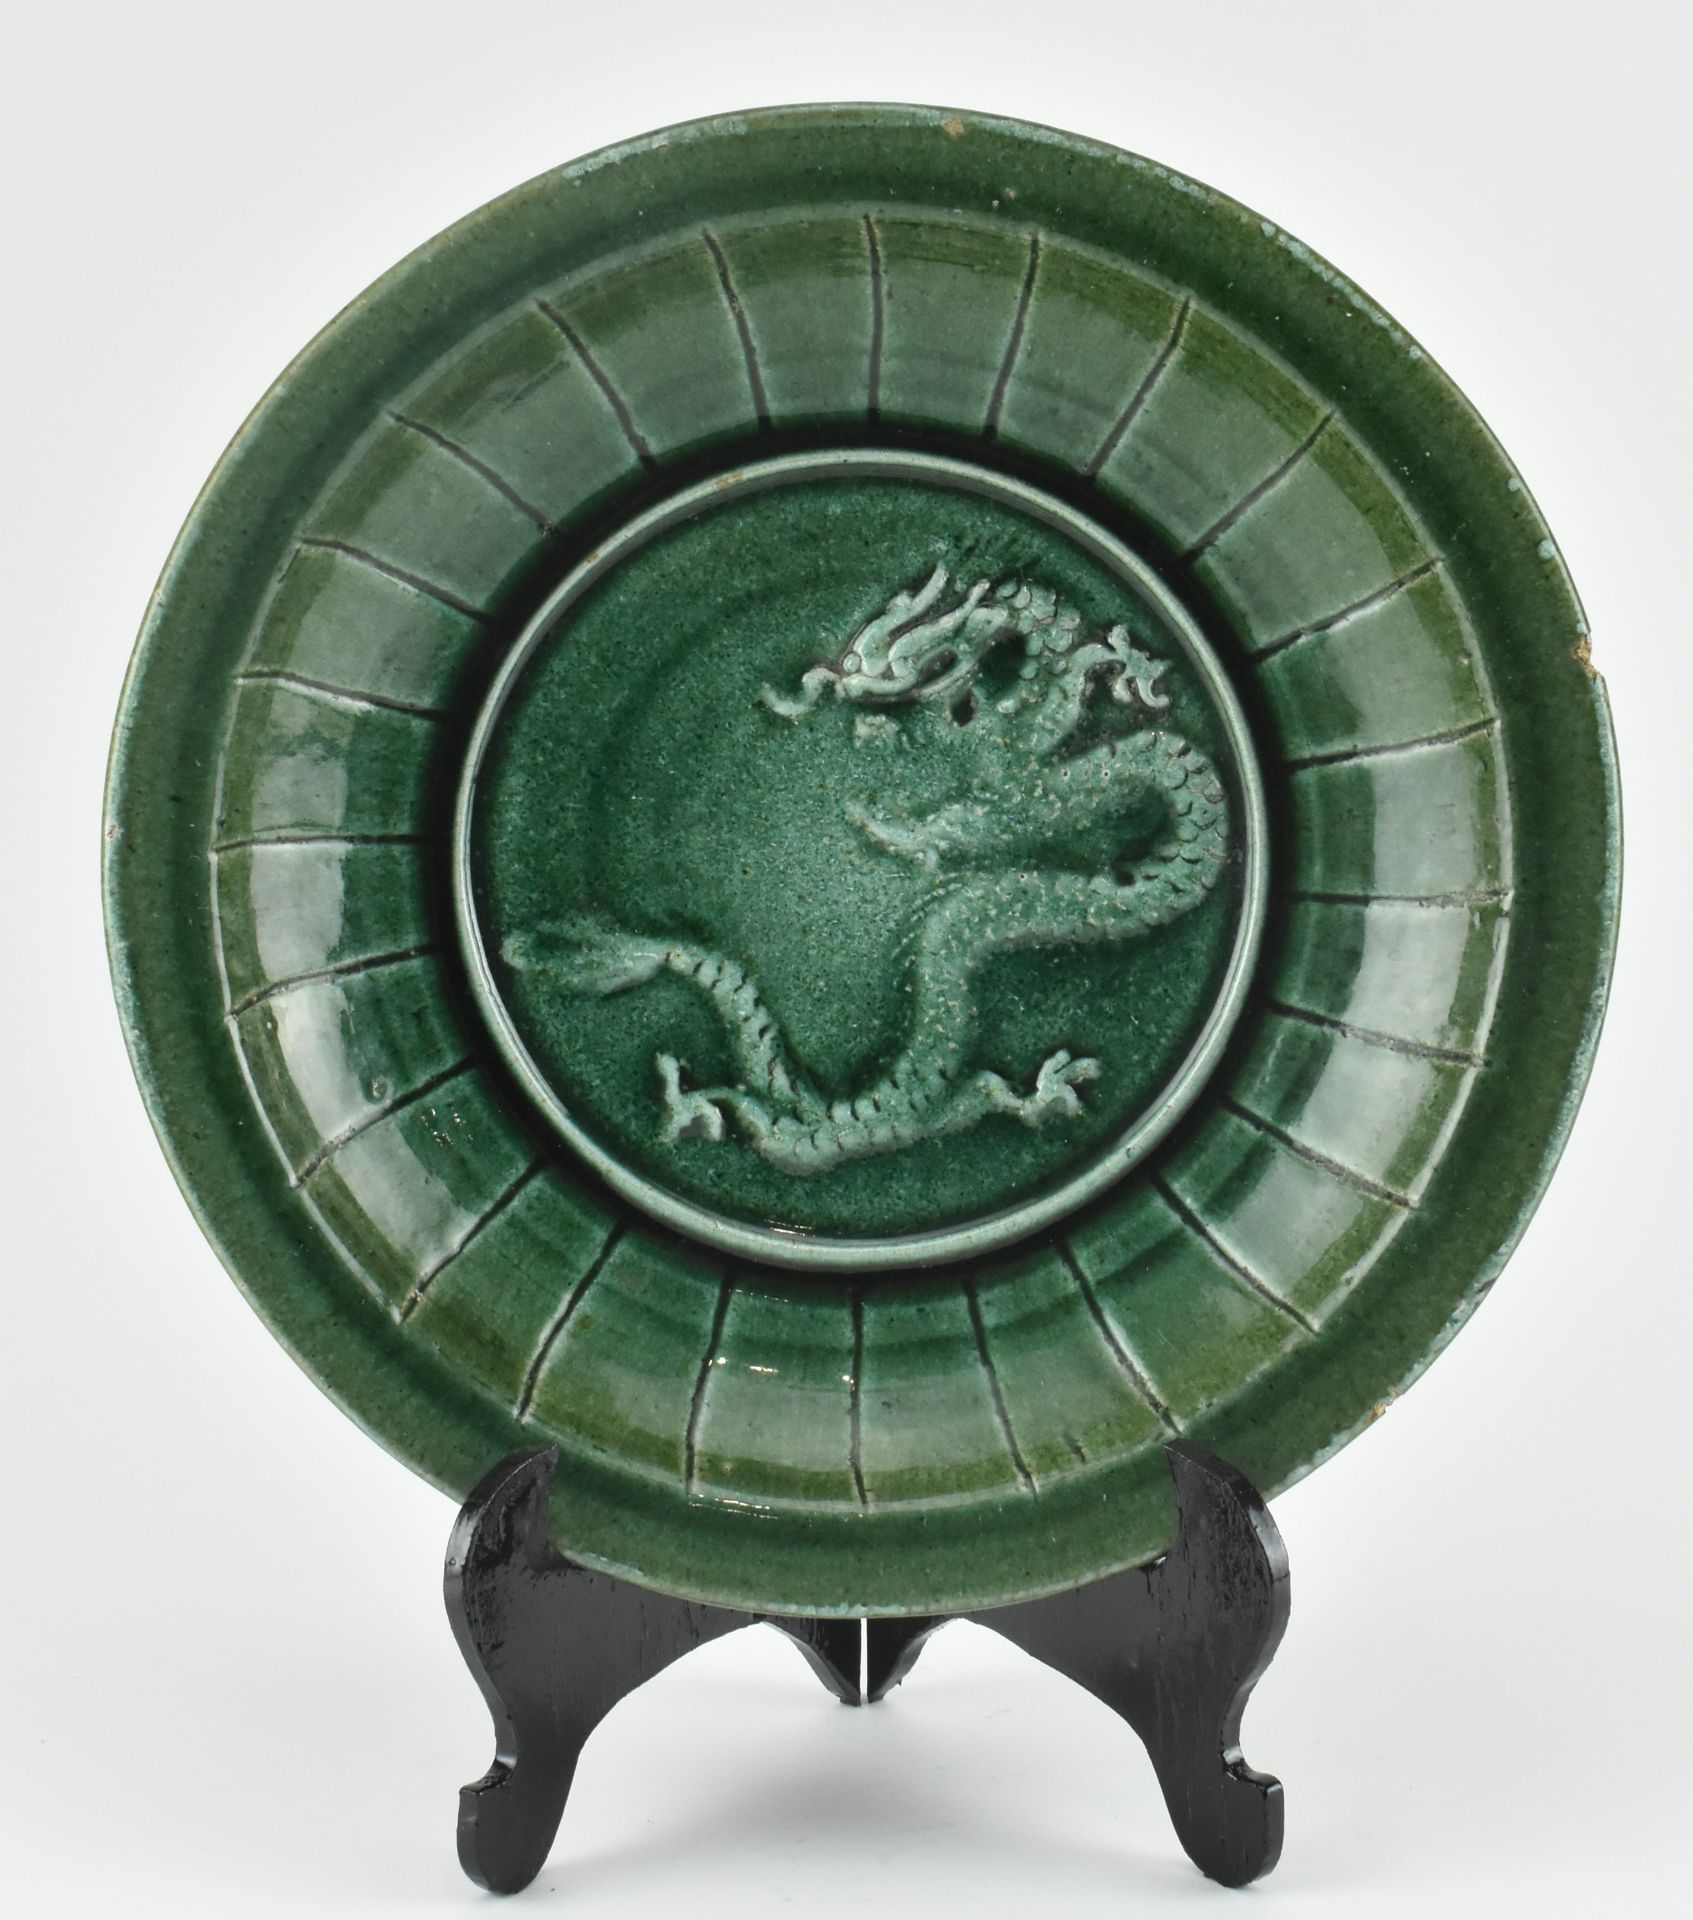 STONEWARE GREEN GLAZED "DRAGON" RELIEF CHARGER 绿釉三爪龙浮雕盘